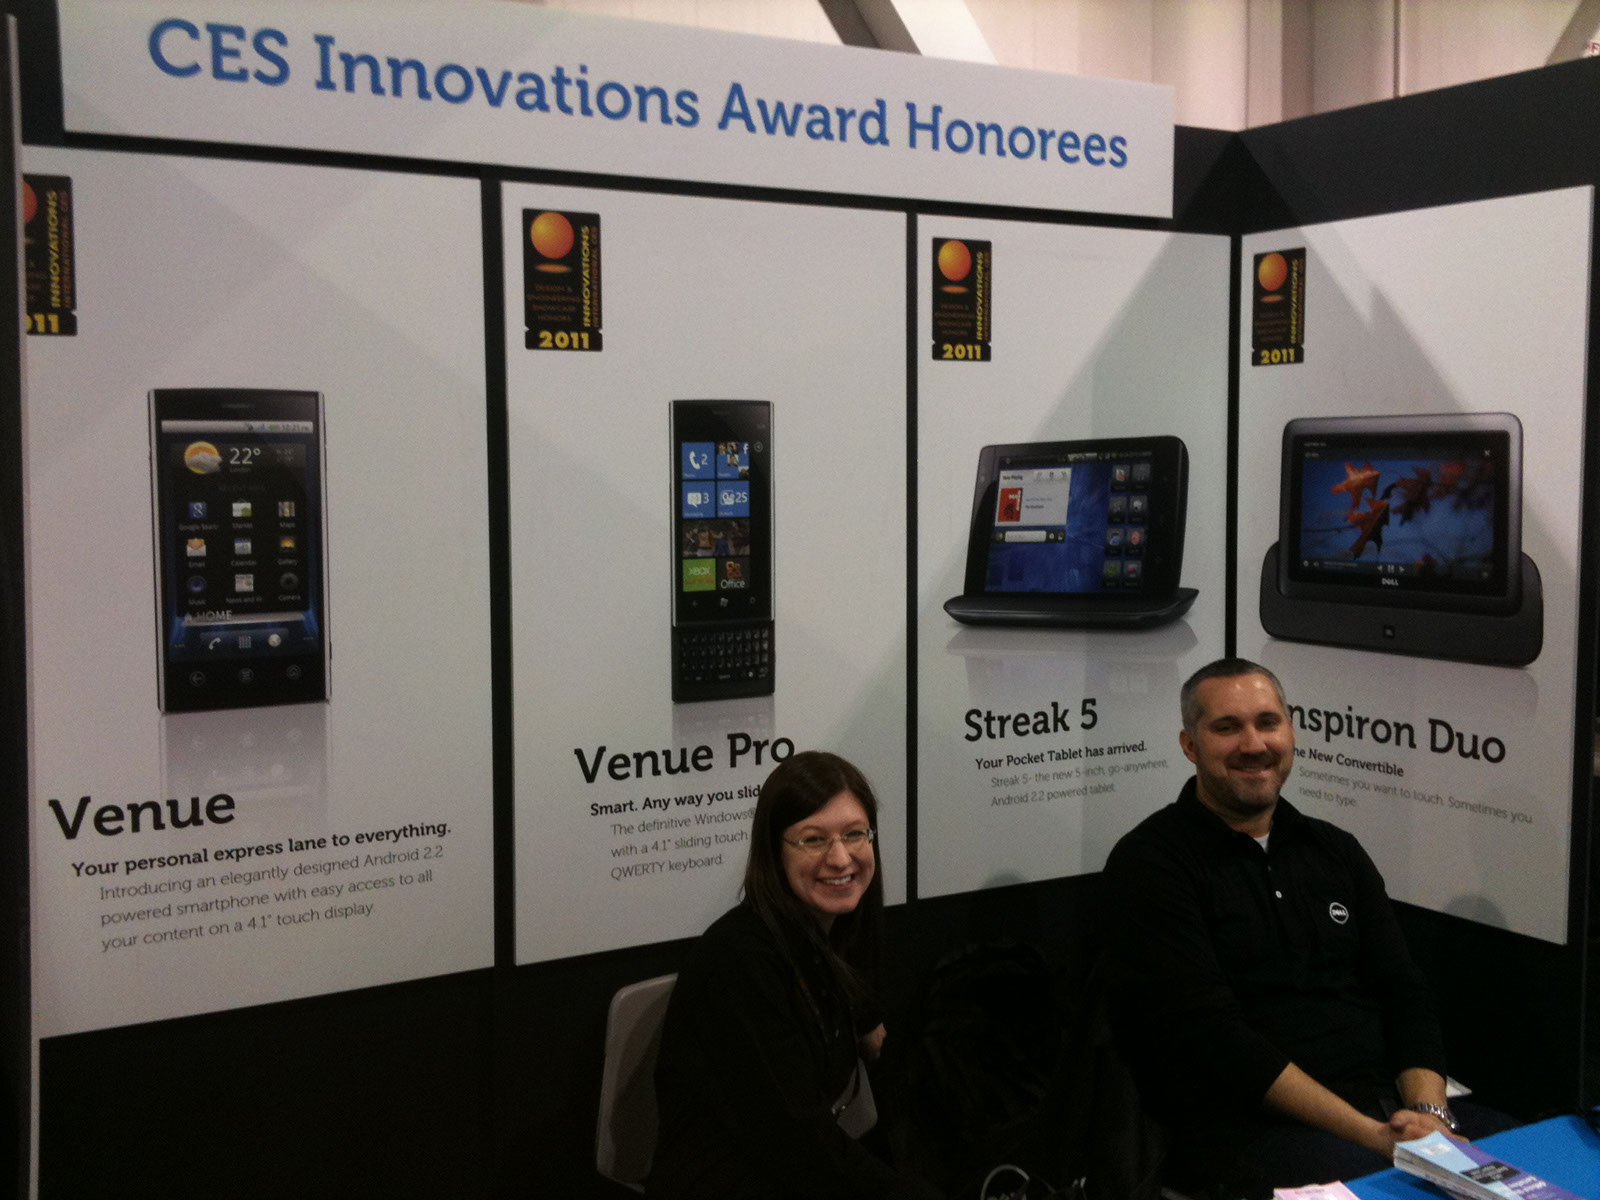 innovation winners at CES 2011